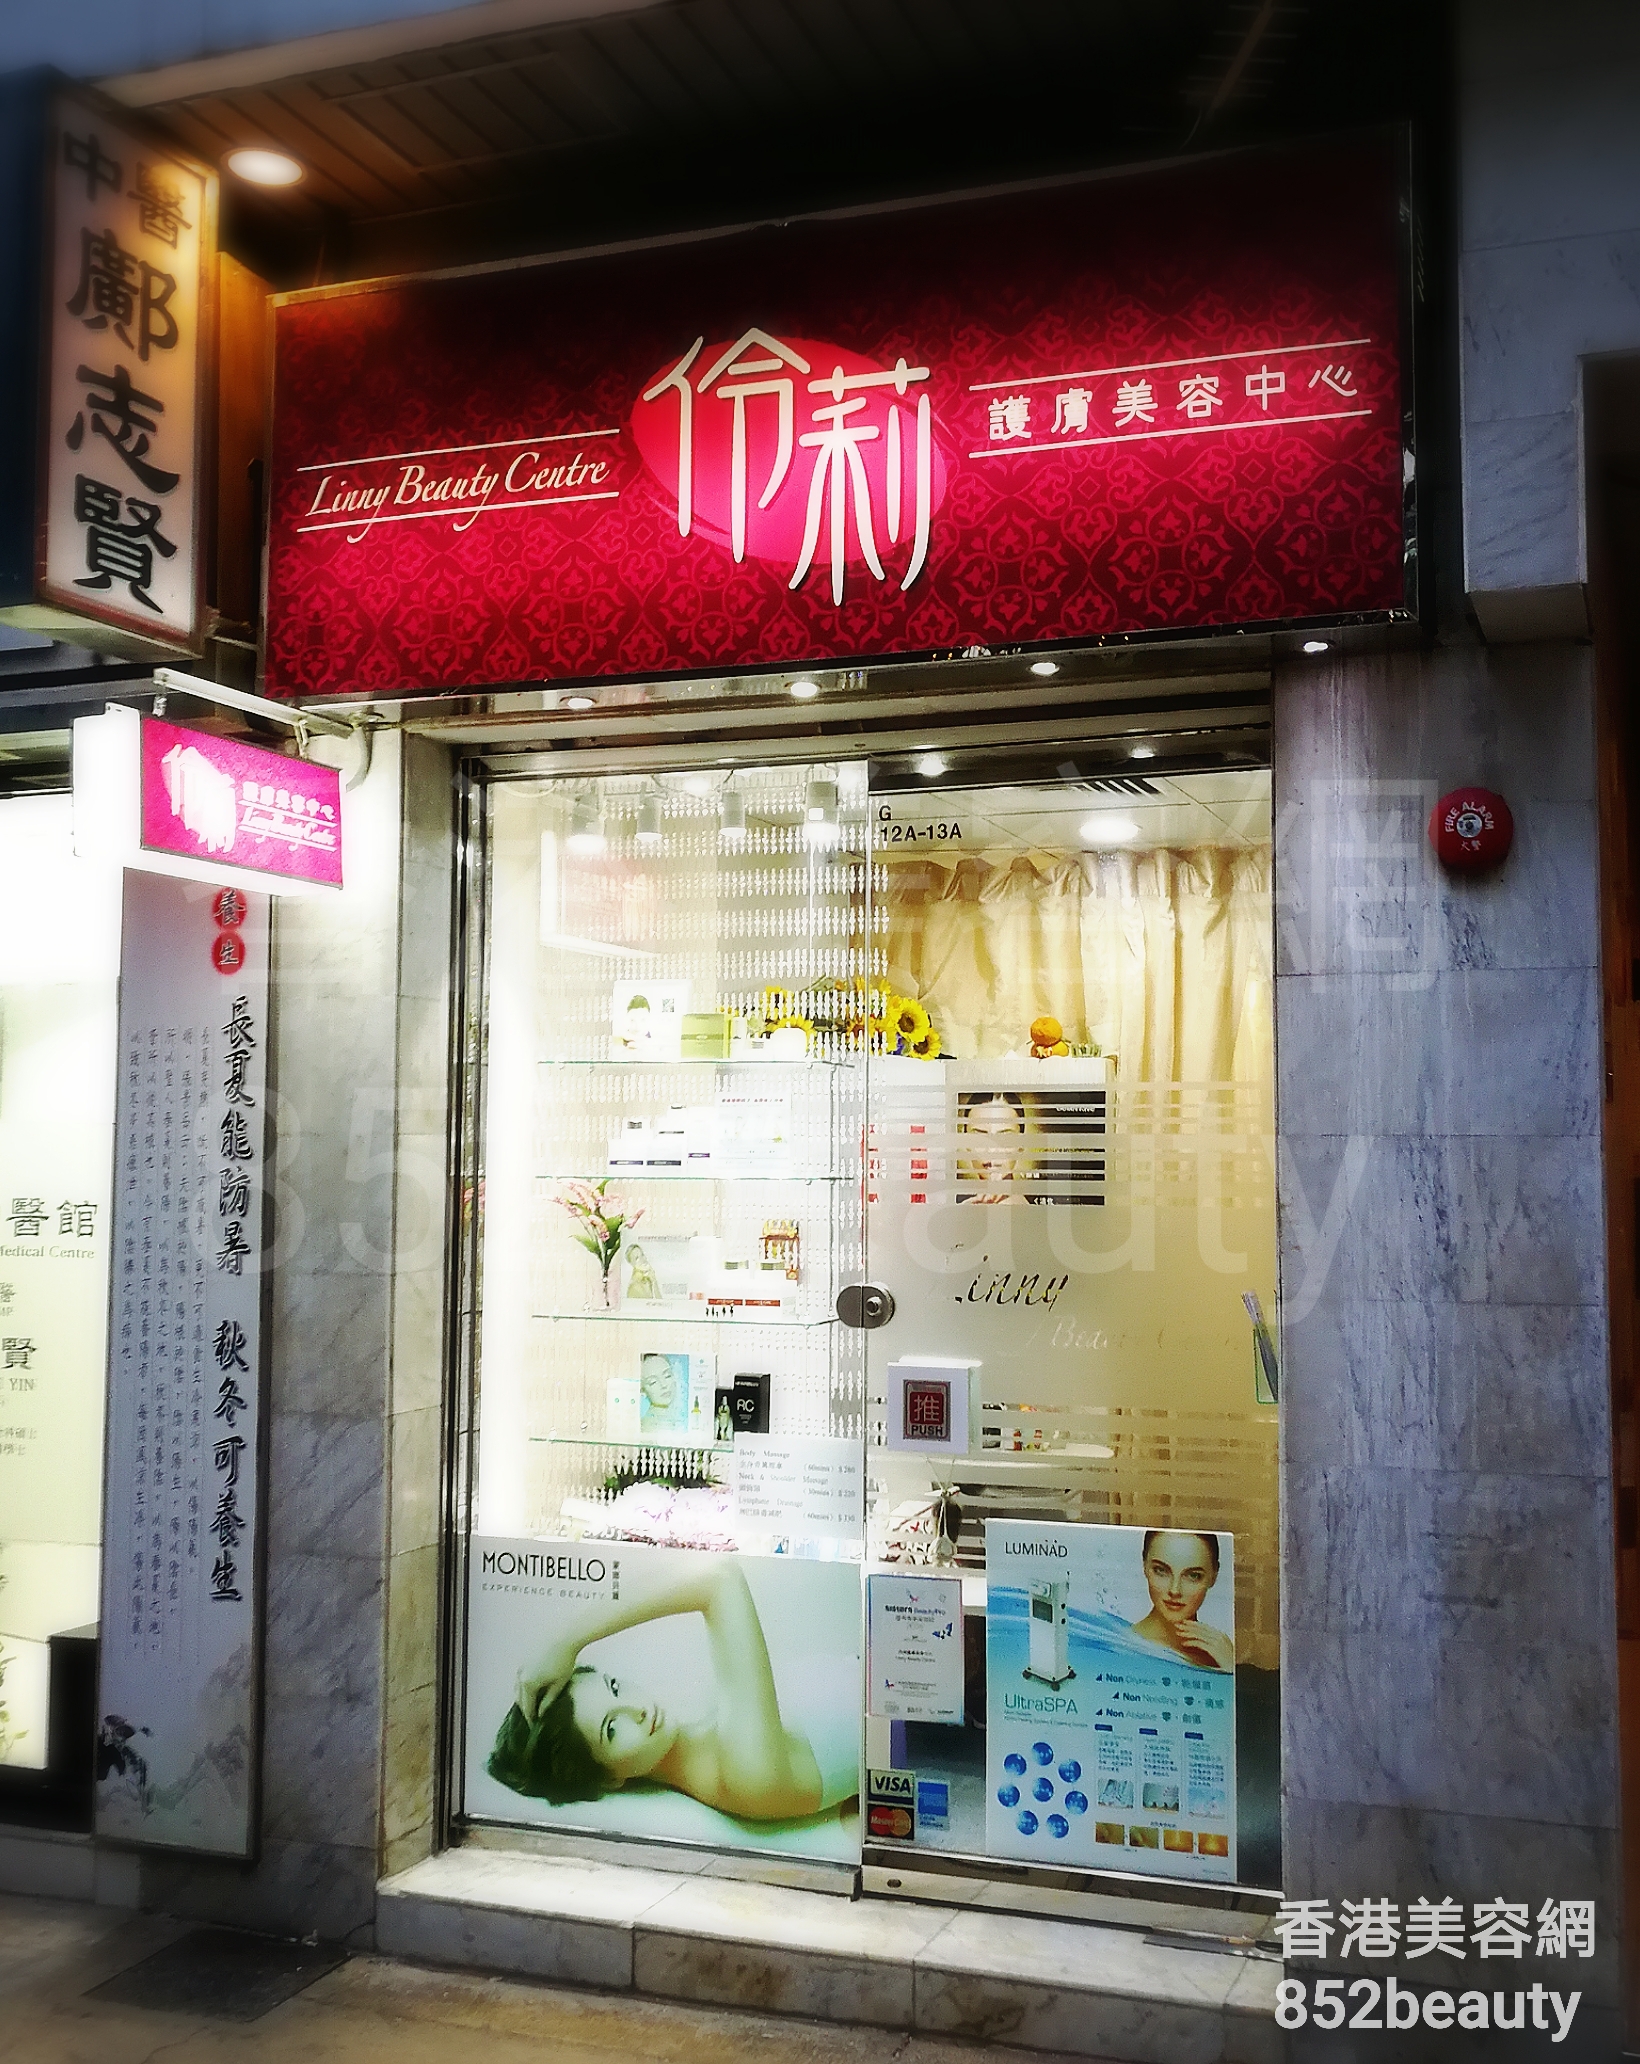 Hand and foot care: 伶莉 Linny Beauty Centre